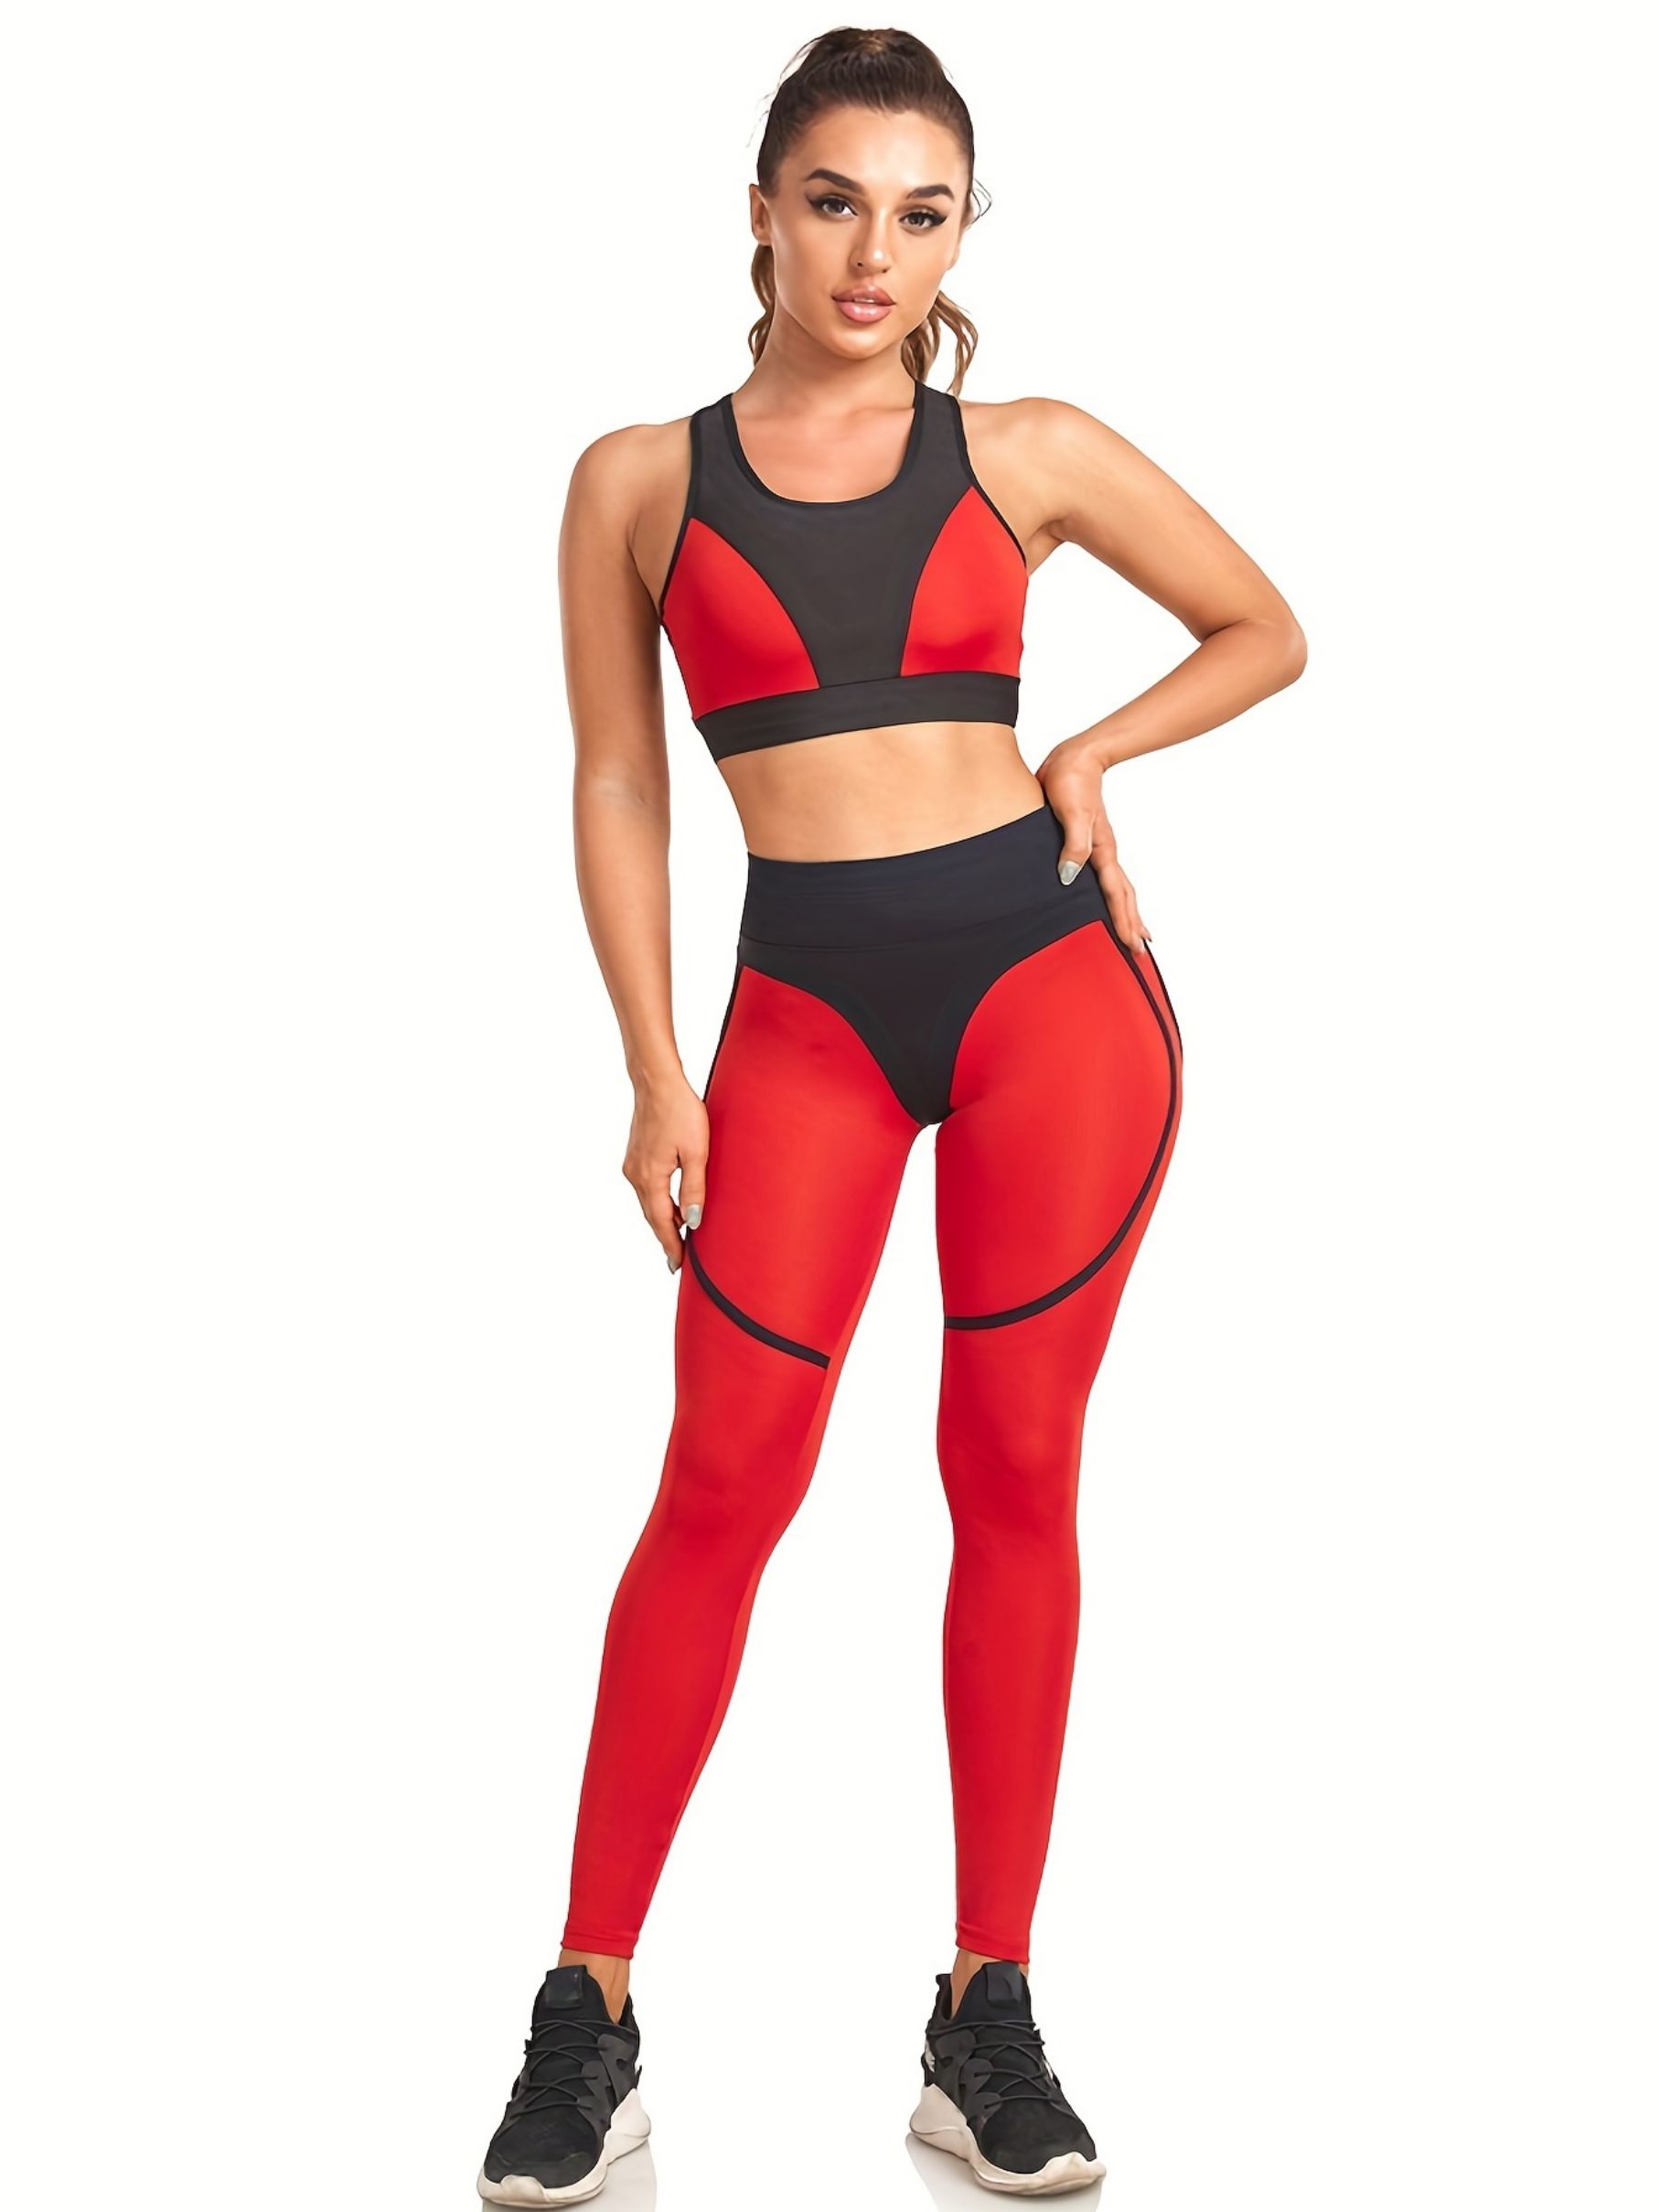 Colorful Breathable And Sweat-absorbing Leggings, Tight-fitting Slim And  Sexy Sports Tight Pants For Running, Women's Activewear